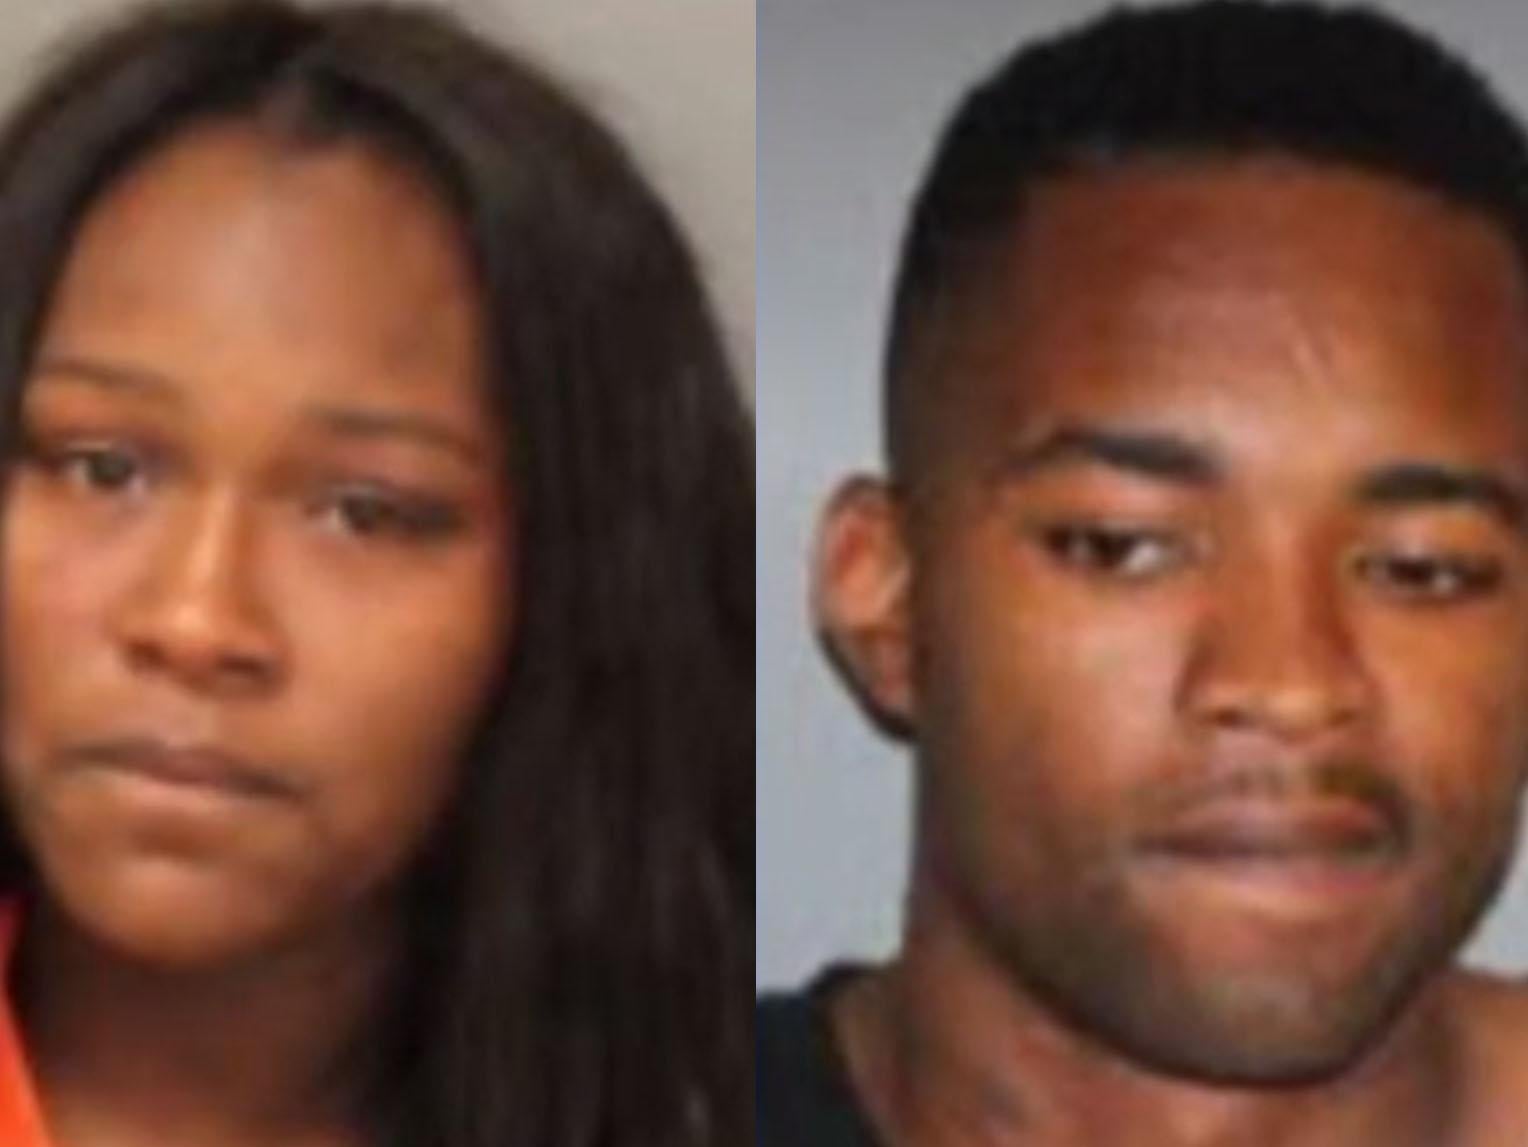 The couple were arrested and levelled with charges including reckless endangerment after the incident in Southeast Memphis, Tennessee